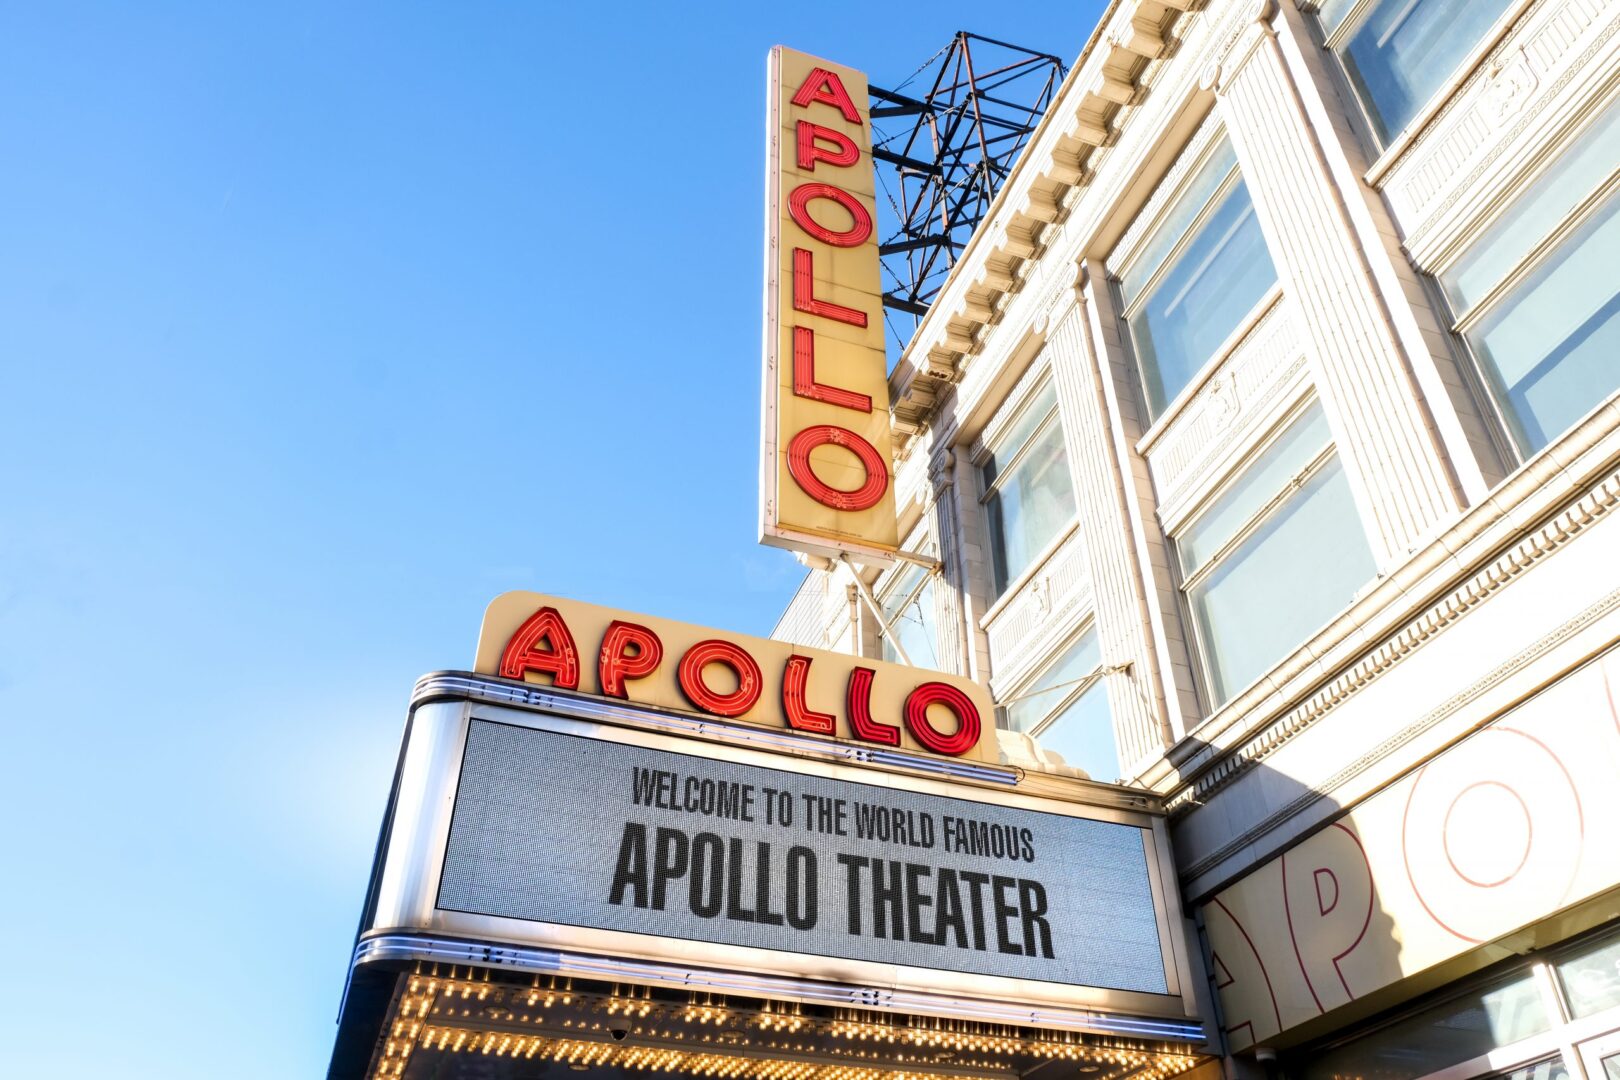 Marquee of the apollo theater welcoming visitors under a clear blue sky.